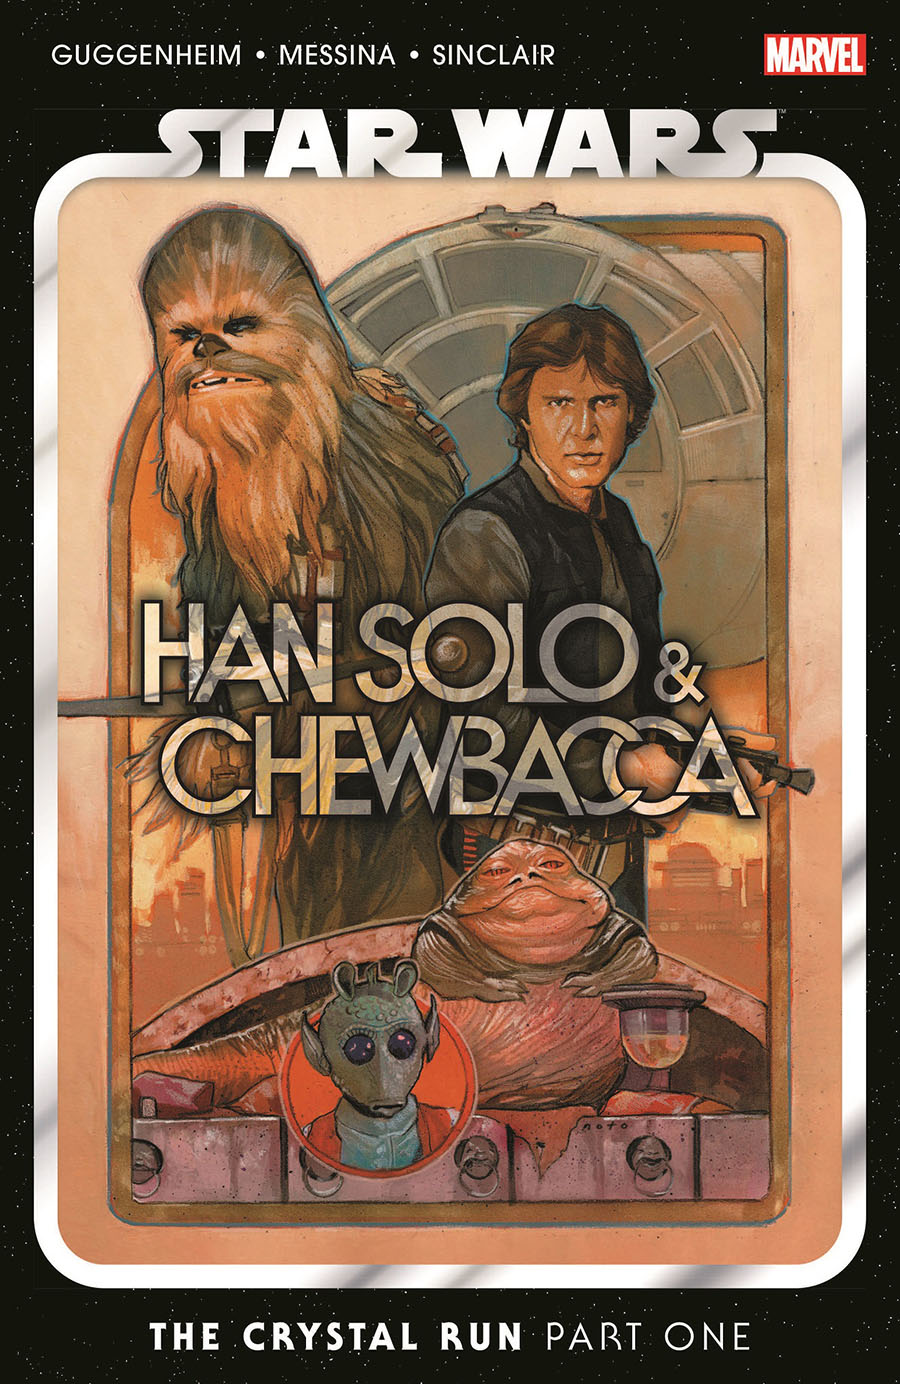 Star Wars Han Solo And Chewbacca Vol 1 The Crystal Run Part One TP